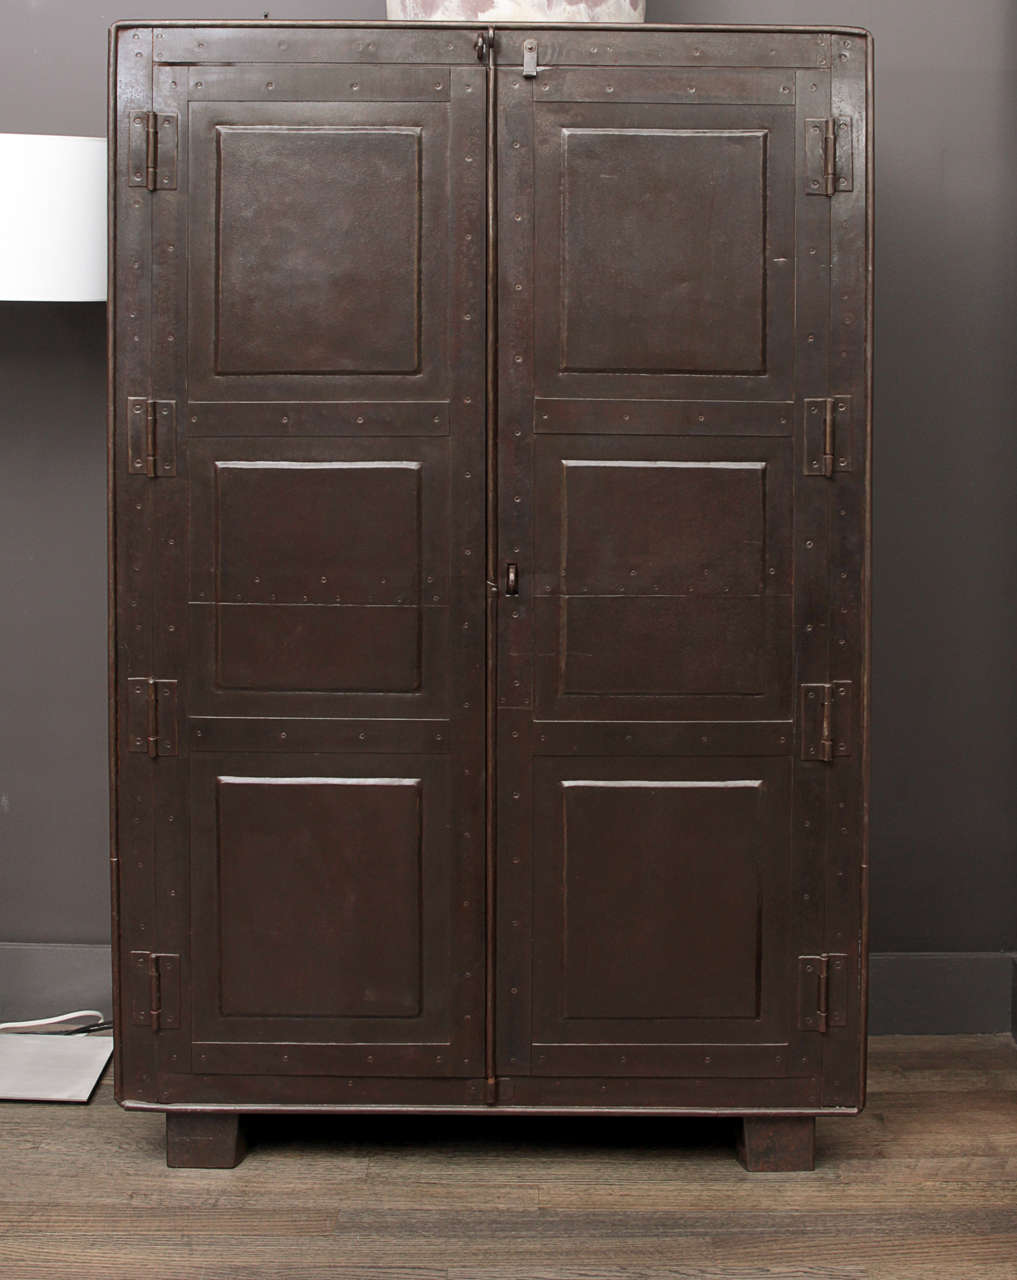 One of a kind, nineteenth century vintage metal cabinet / armoire with two lockable doors. Made in India.